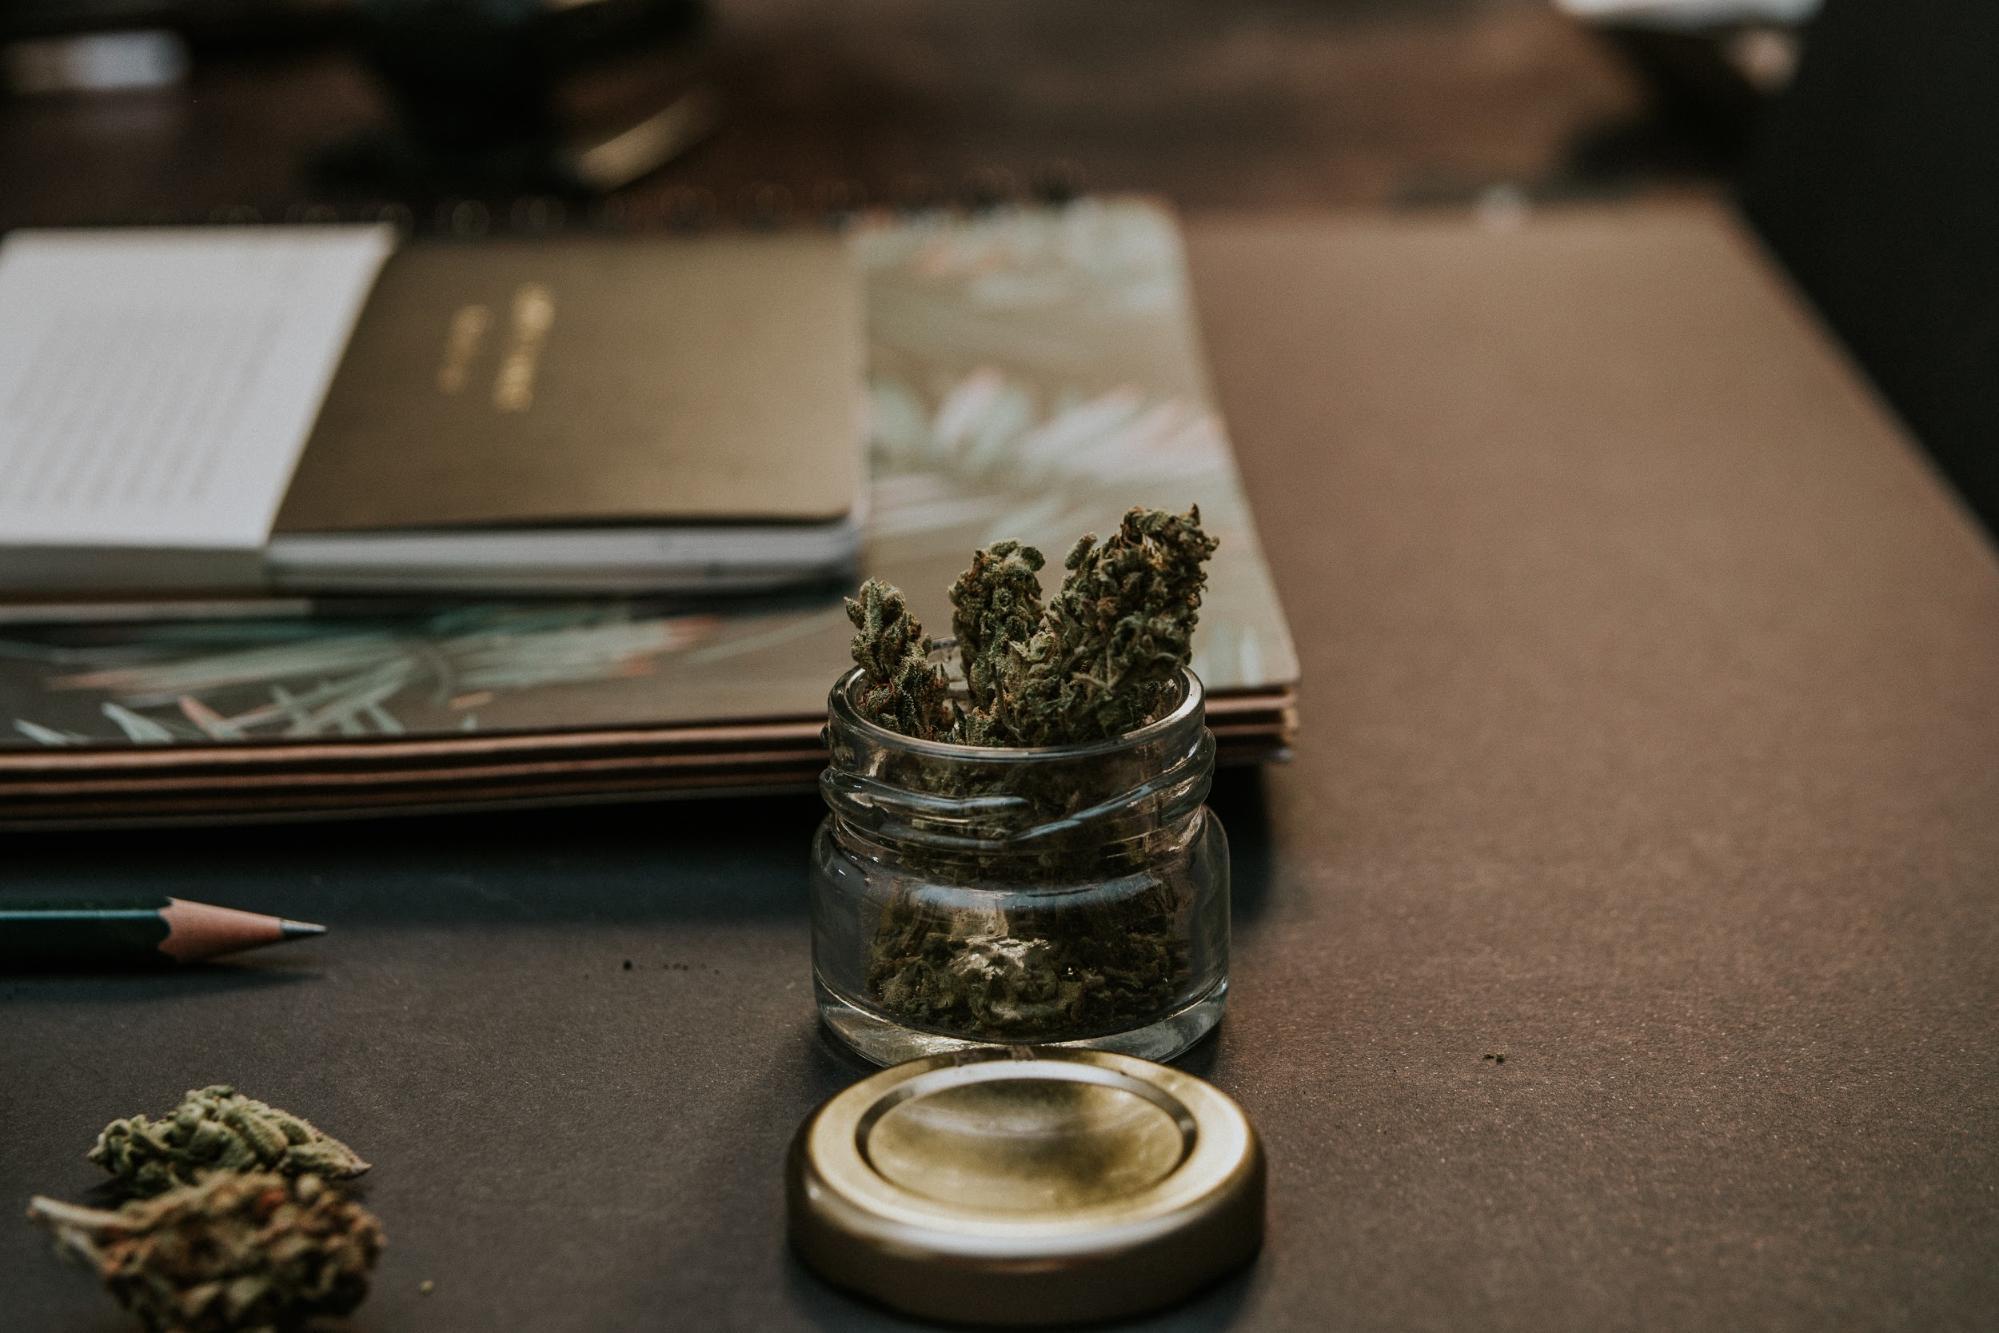 use strategic pricing tactics at your dispensary